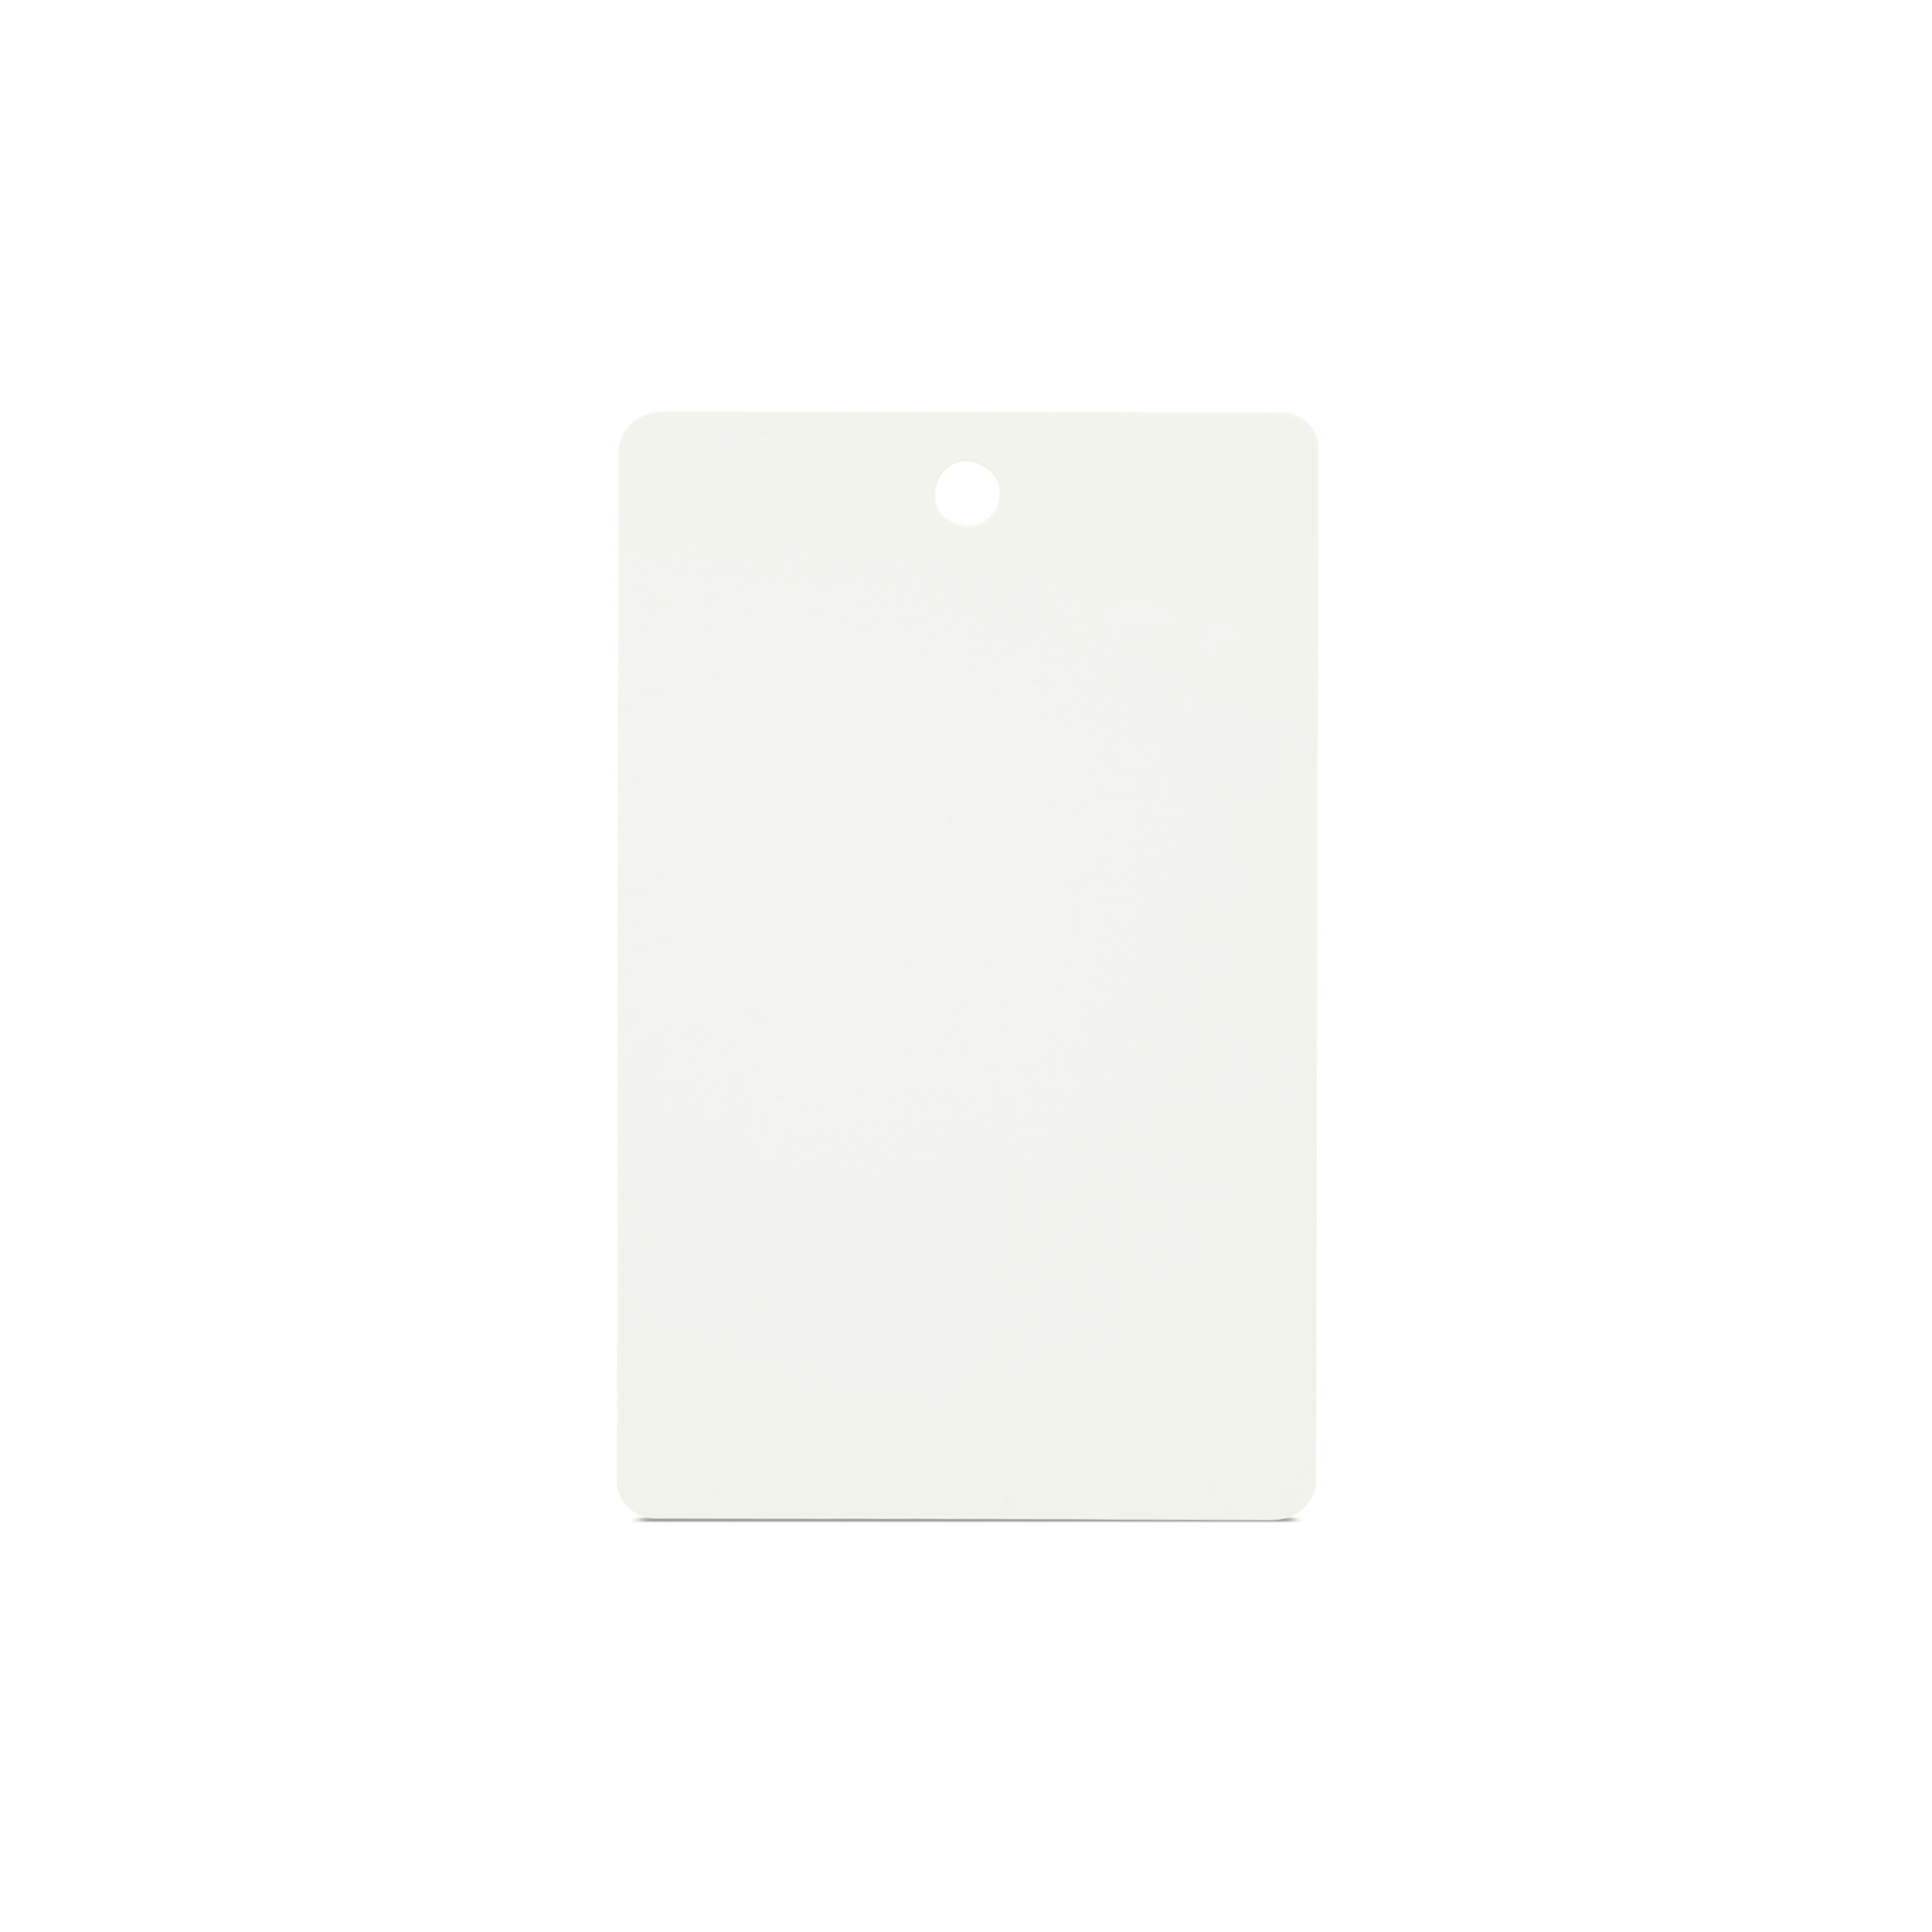 NFC Card PVC - 85,6 x 54 mm - NTAG216 - 924 Byte - white - portrait perforated